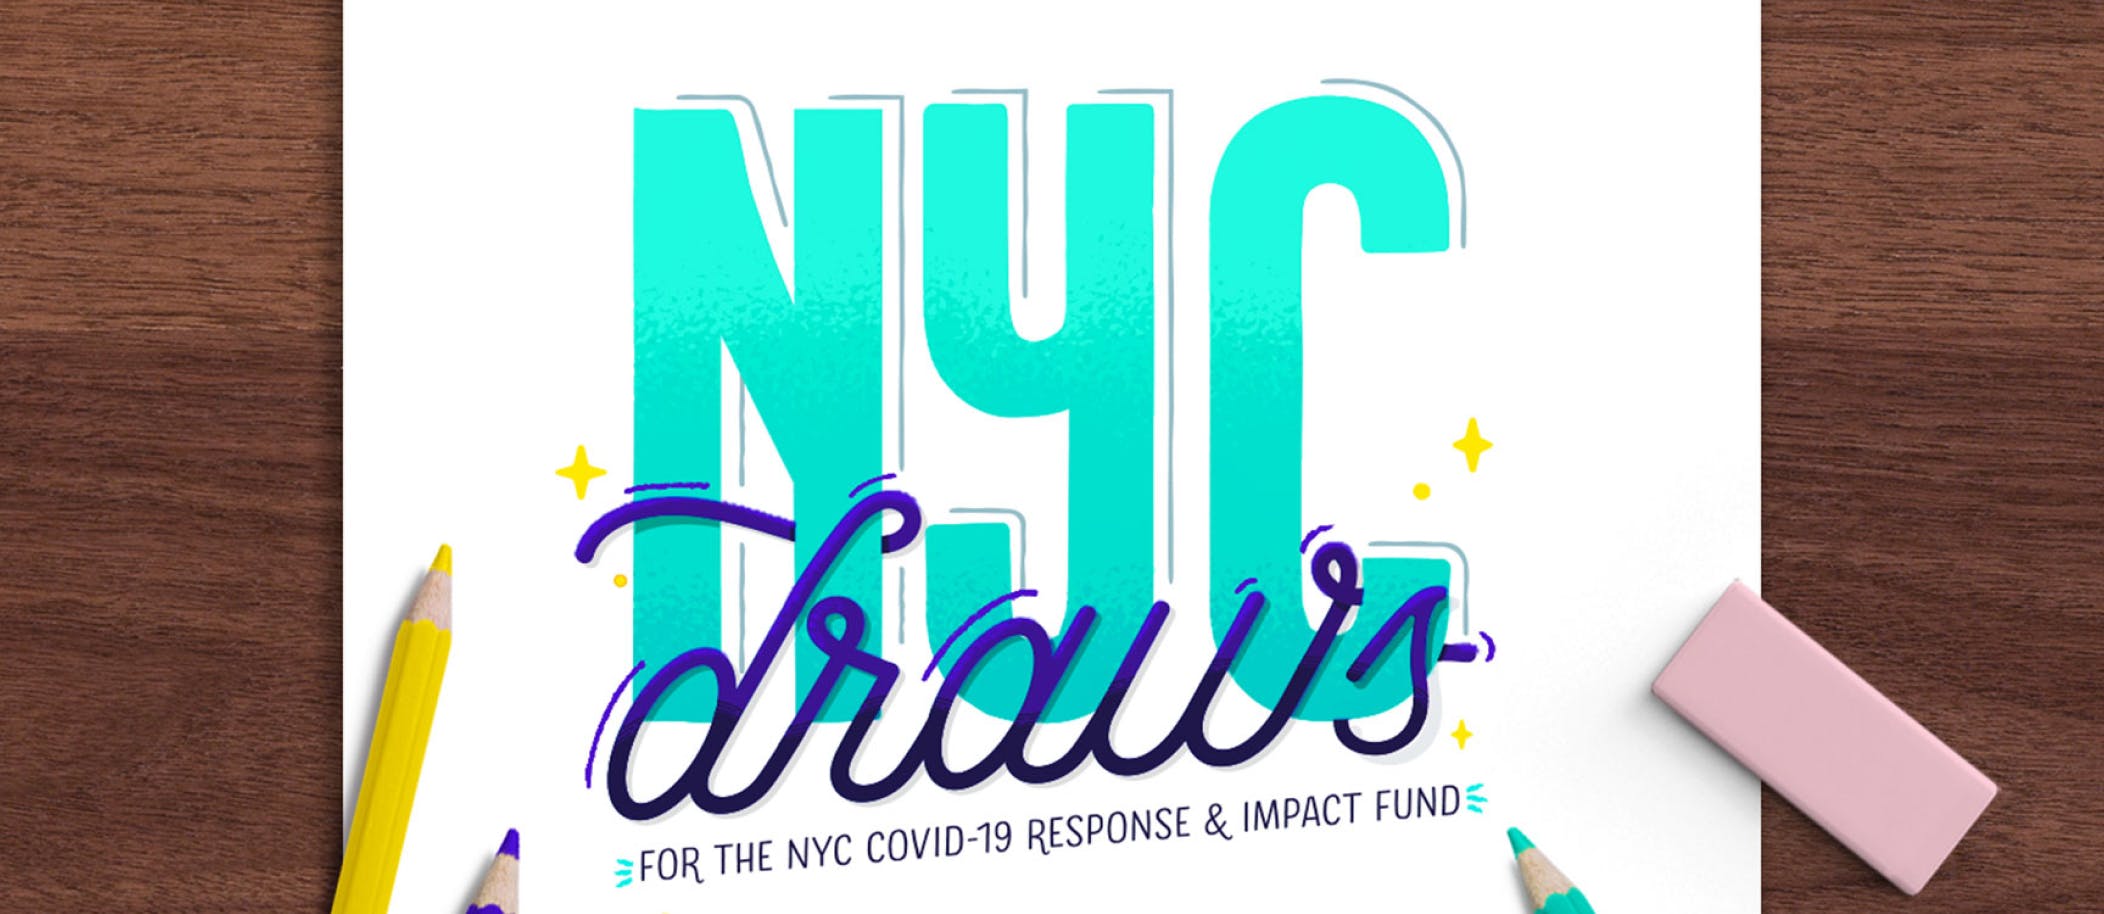 A picture of a paper with the words "NYC draws" and "For the NYC Covid 19 response & imapct fund".